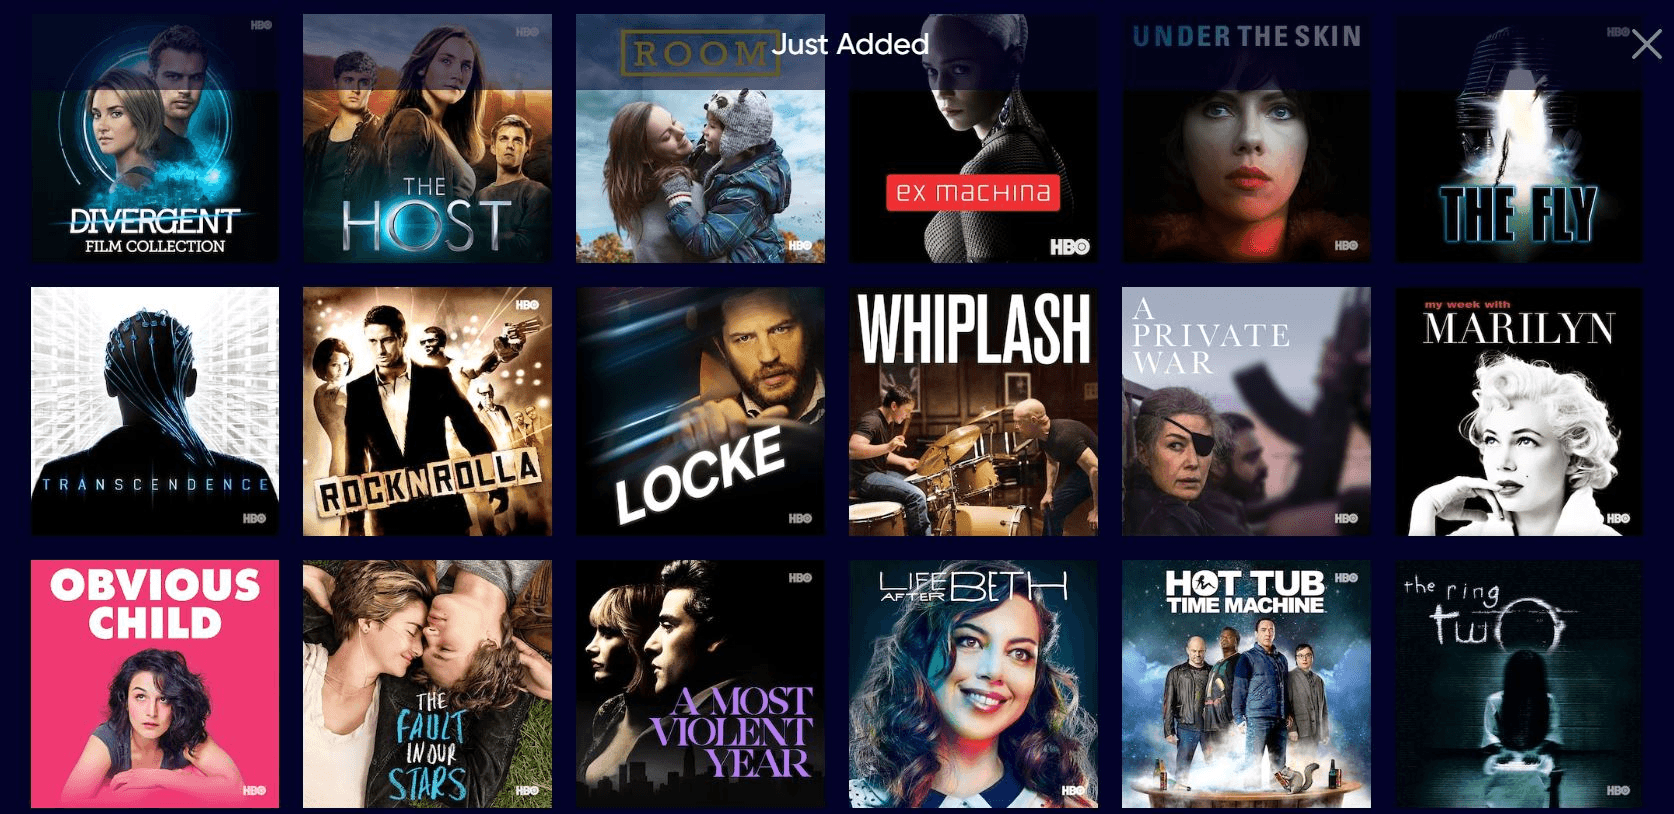 There are a lot of just added shows and movies, including The Fault in Our Stars, Obvious Child, Divergent, The Host, Rock N Rolla, and a Private War.